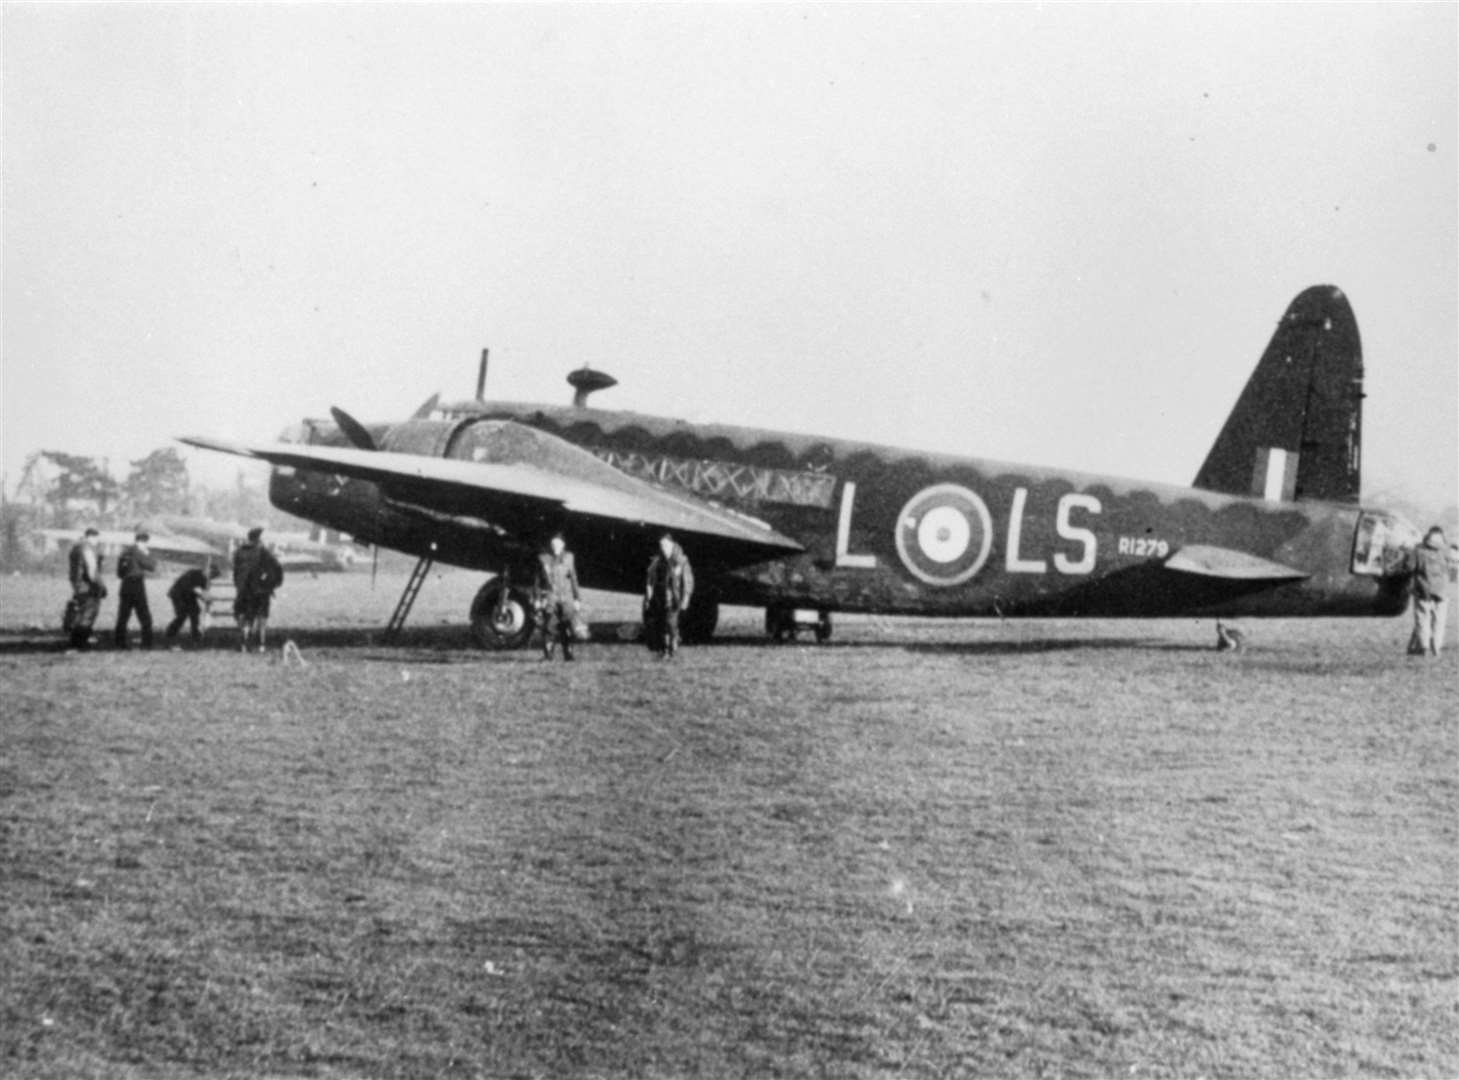 A Wellington bomber similar to the one that crashed. Image courtesy of the RAF.